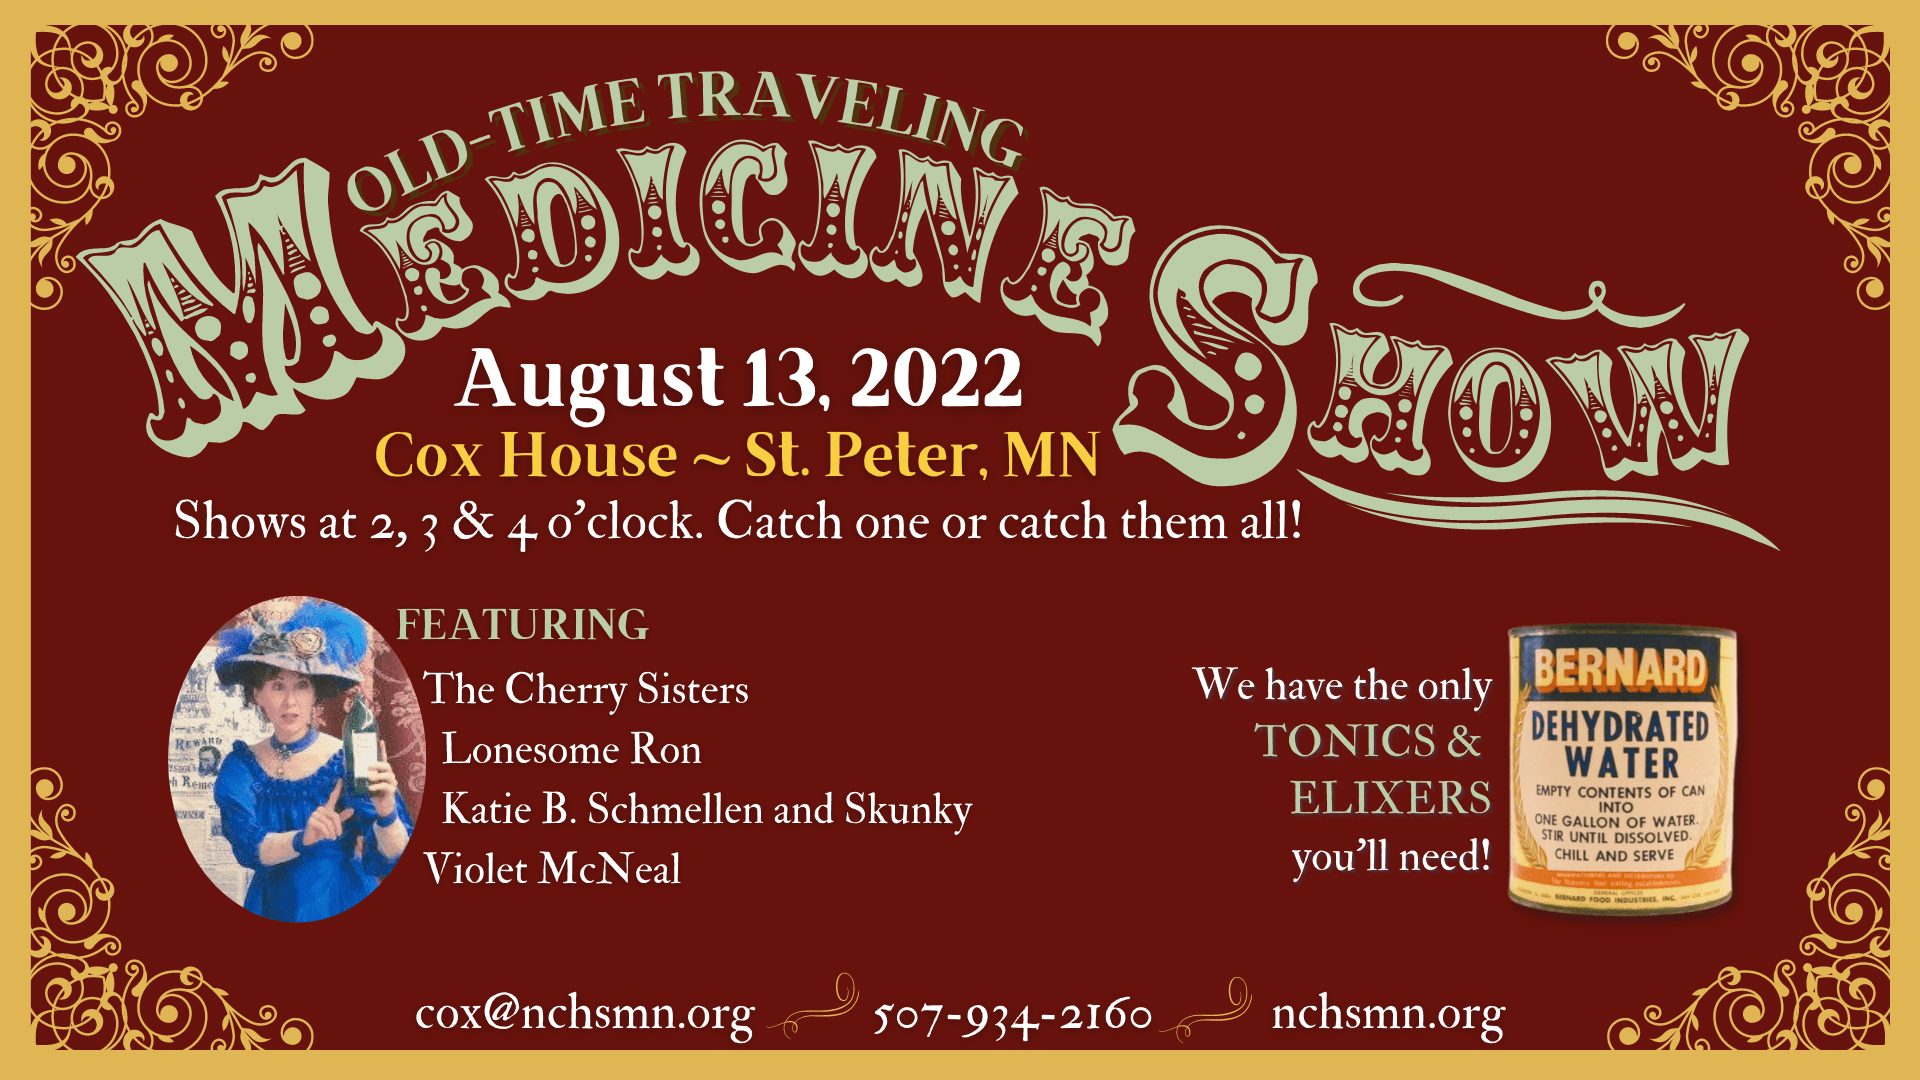 Red toned graphic for a Medicine Show event. Mint green text over a maroon background says Old-Time Traveling Medicine Show. The date and times are listed below in white. There's a photo of a woman in Vaudeville attire holding a tonic bottle at bottom.